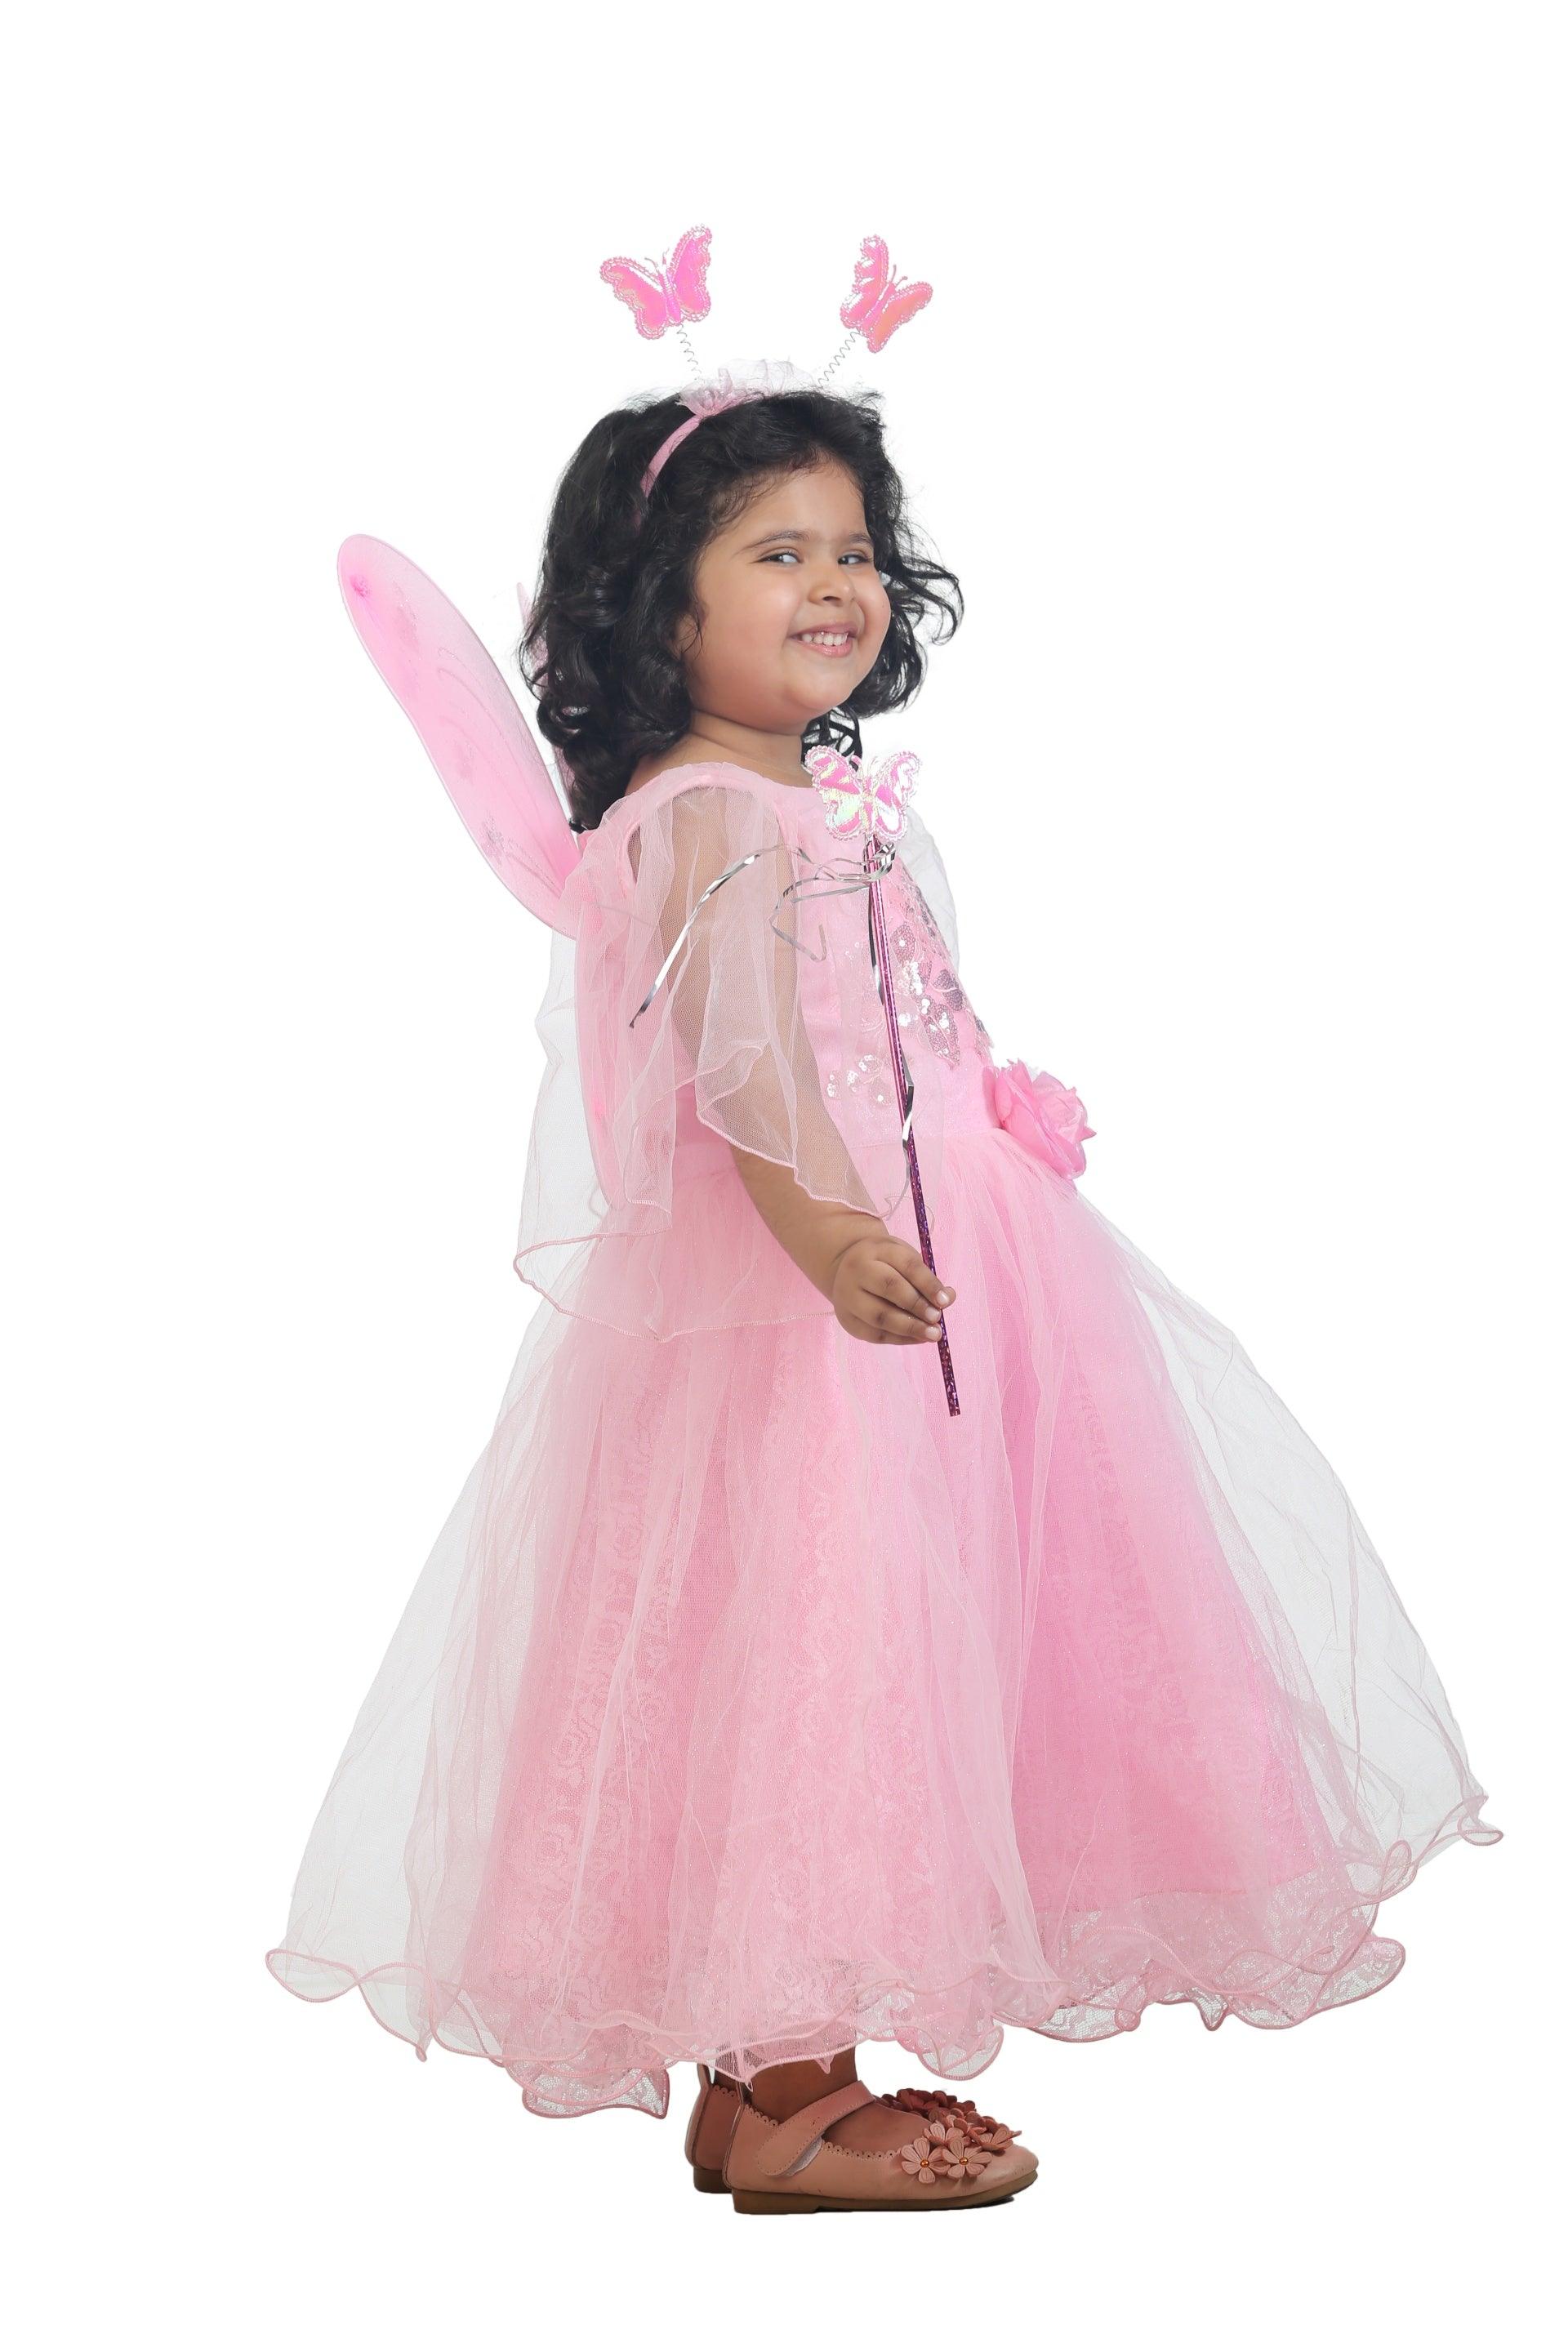 ADTAS Girls Kids Gowns Net Frock Pari Dress Frock with Hairband Fairy Stick  & Fairy Wings - Multicolor (3-4 Years) : Amazon.in: Clothing & Accessories